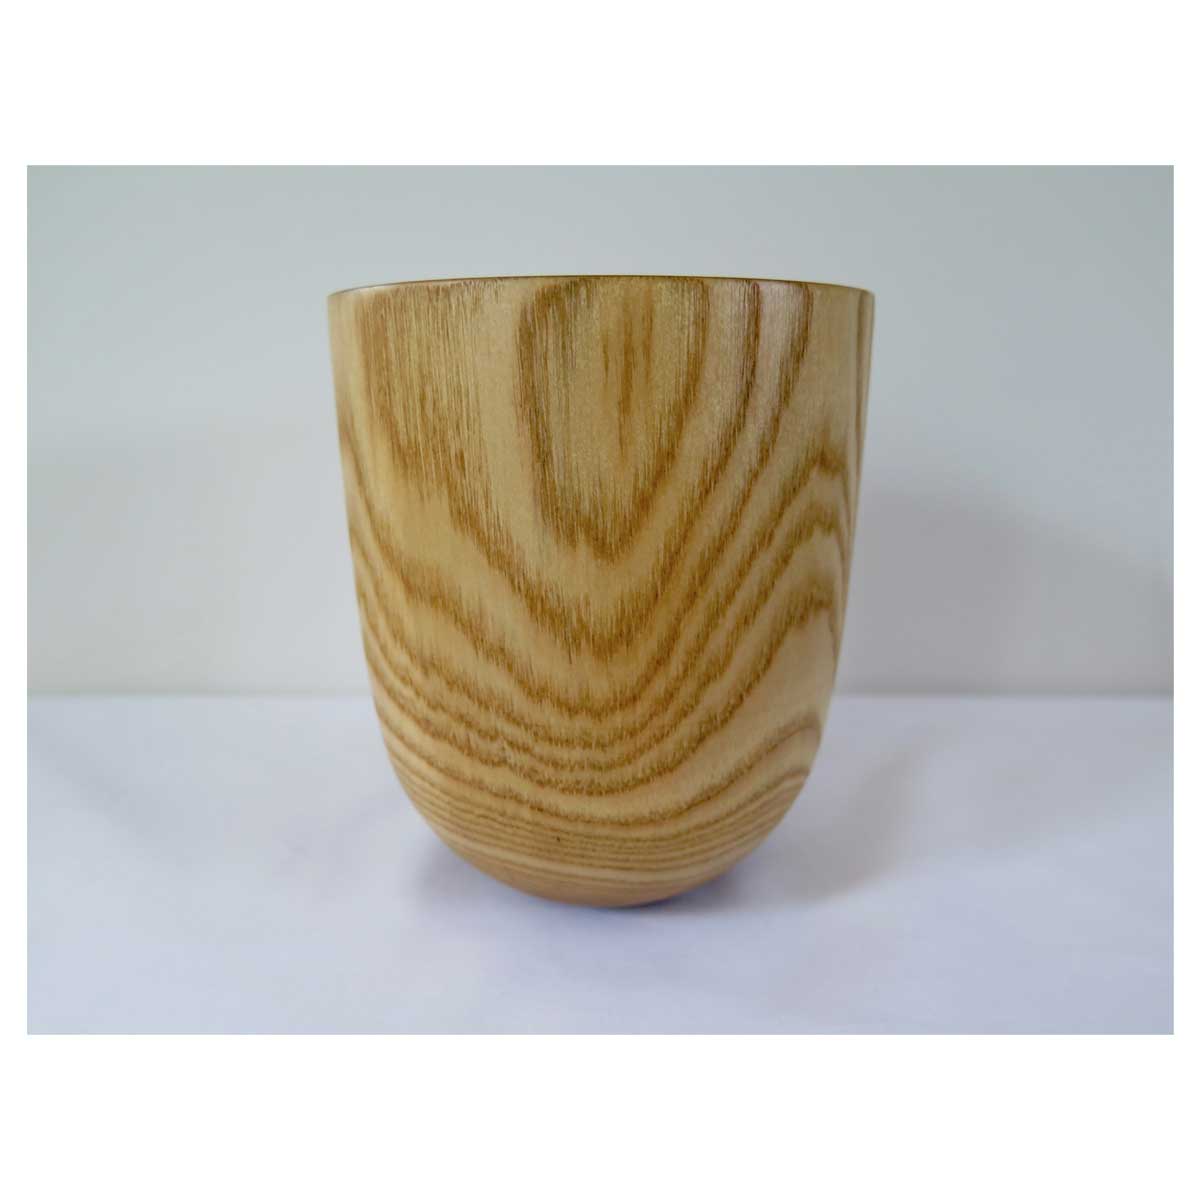 Spalted Small Vase/Vessel